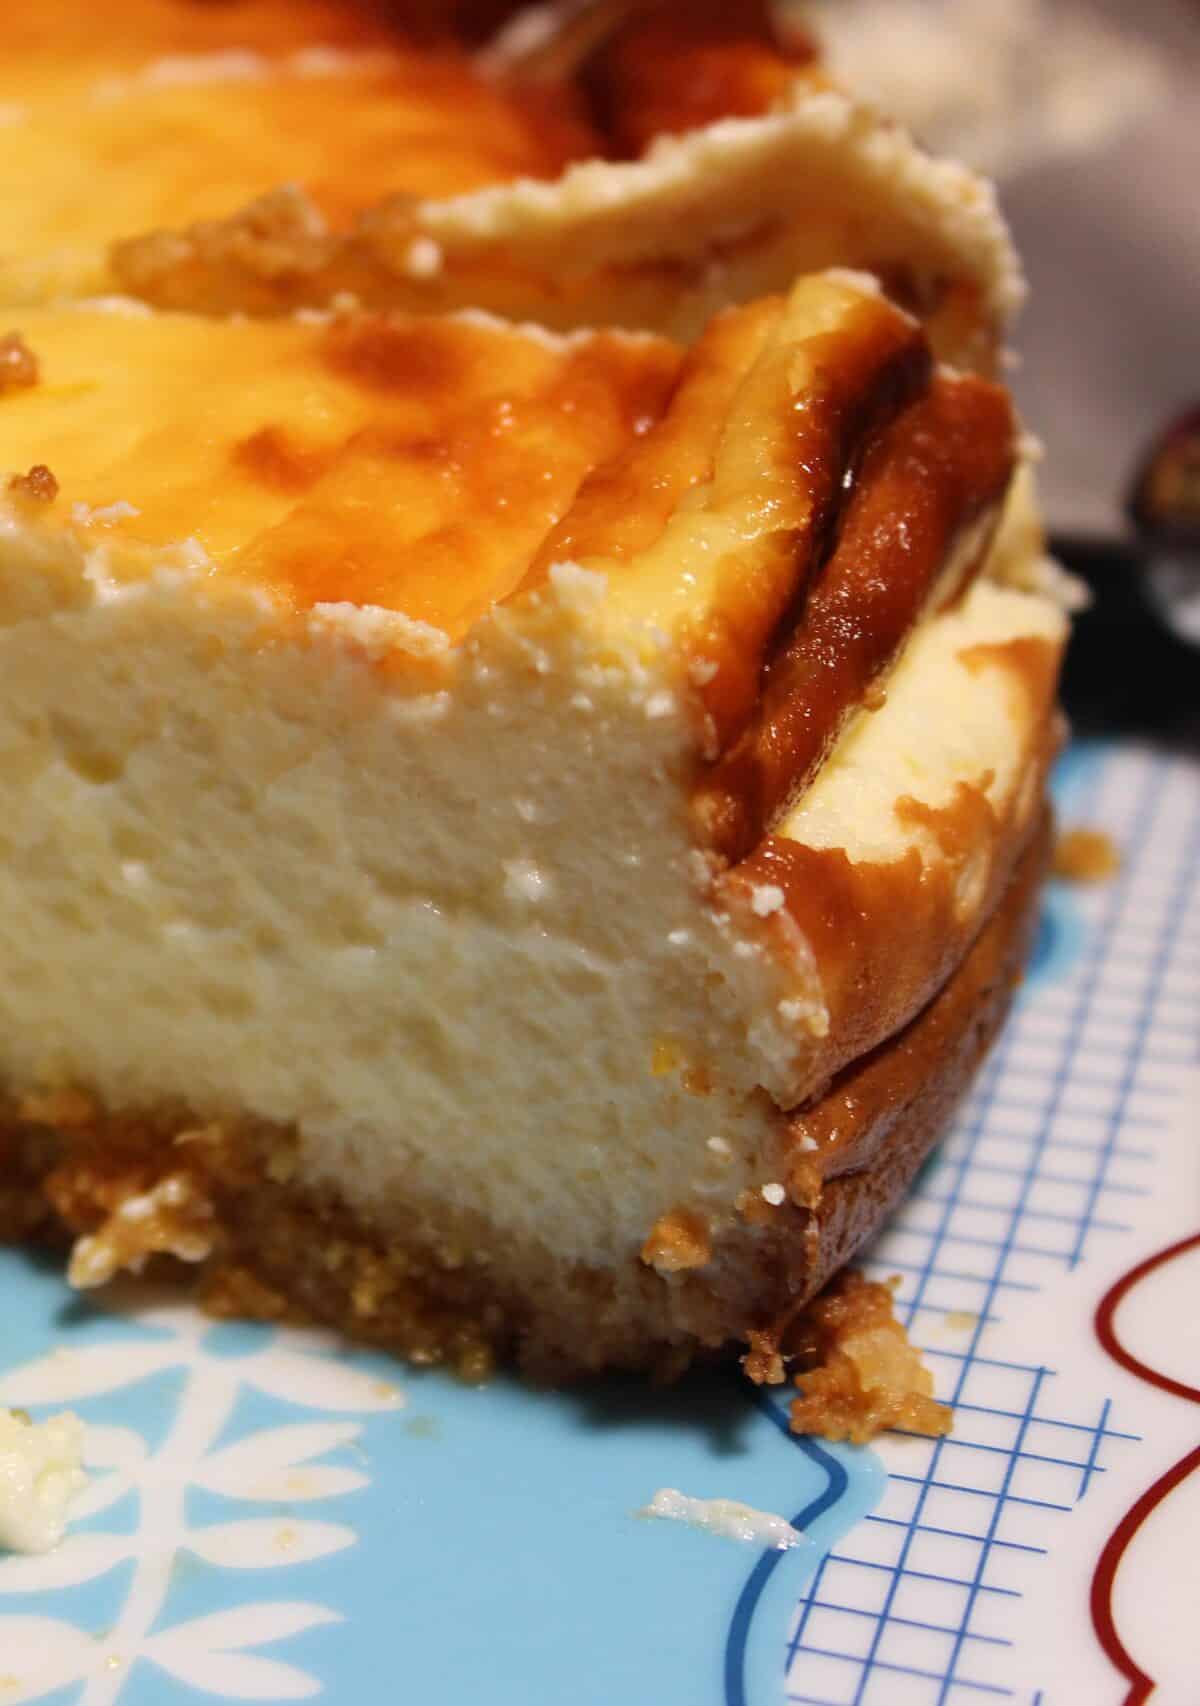  Cream cheese and sour cream give this cheesecake its signature tangy flavor.